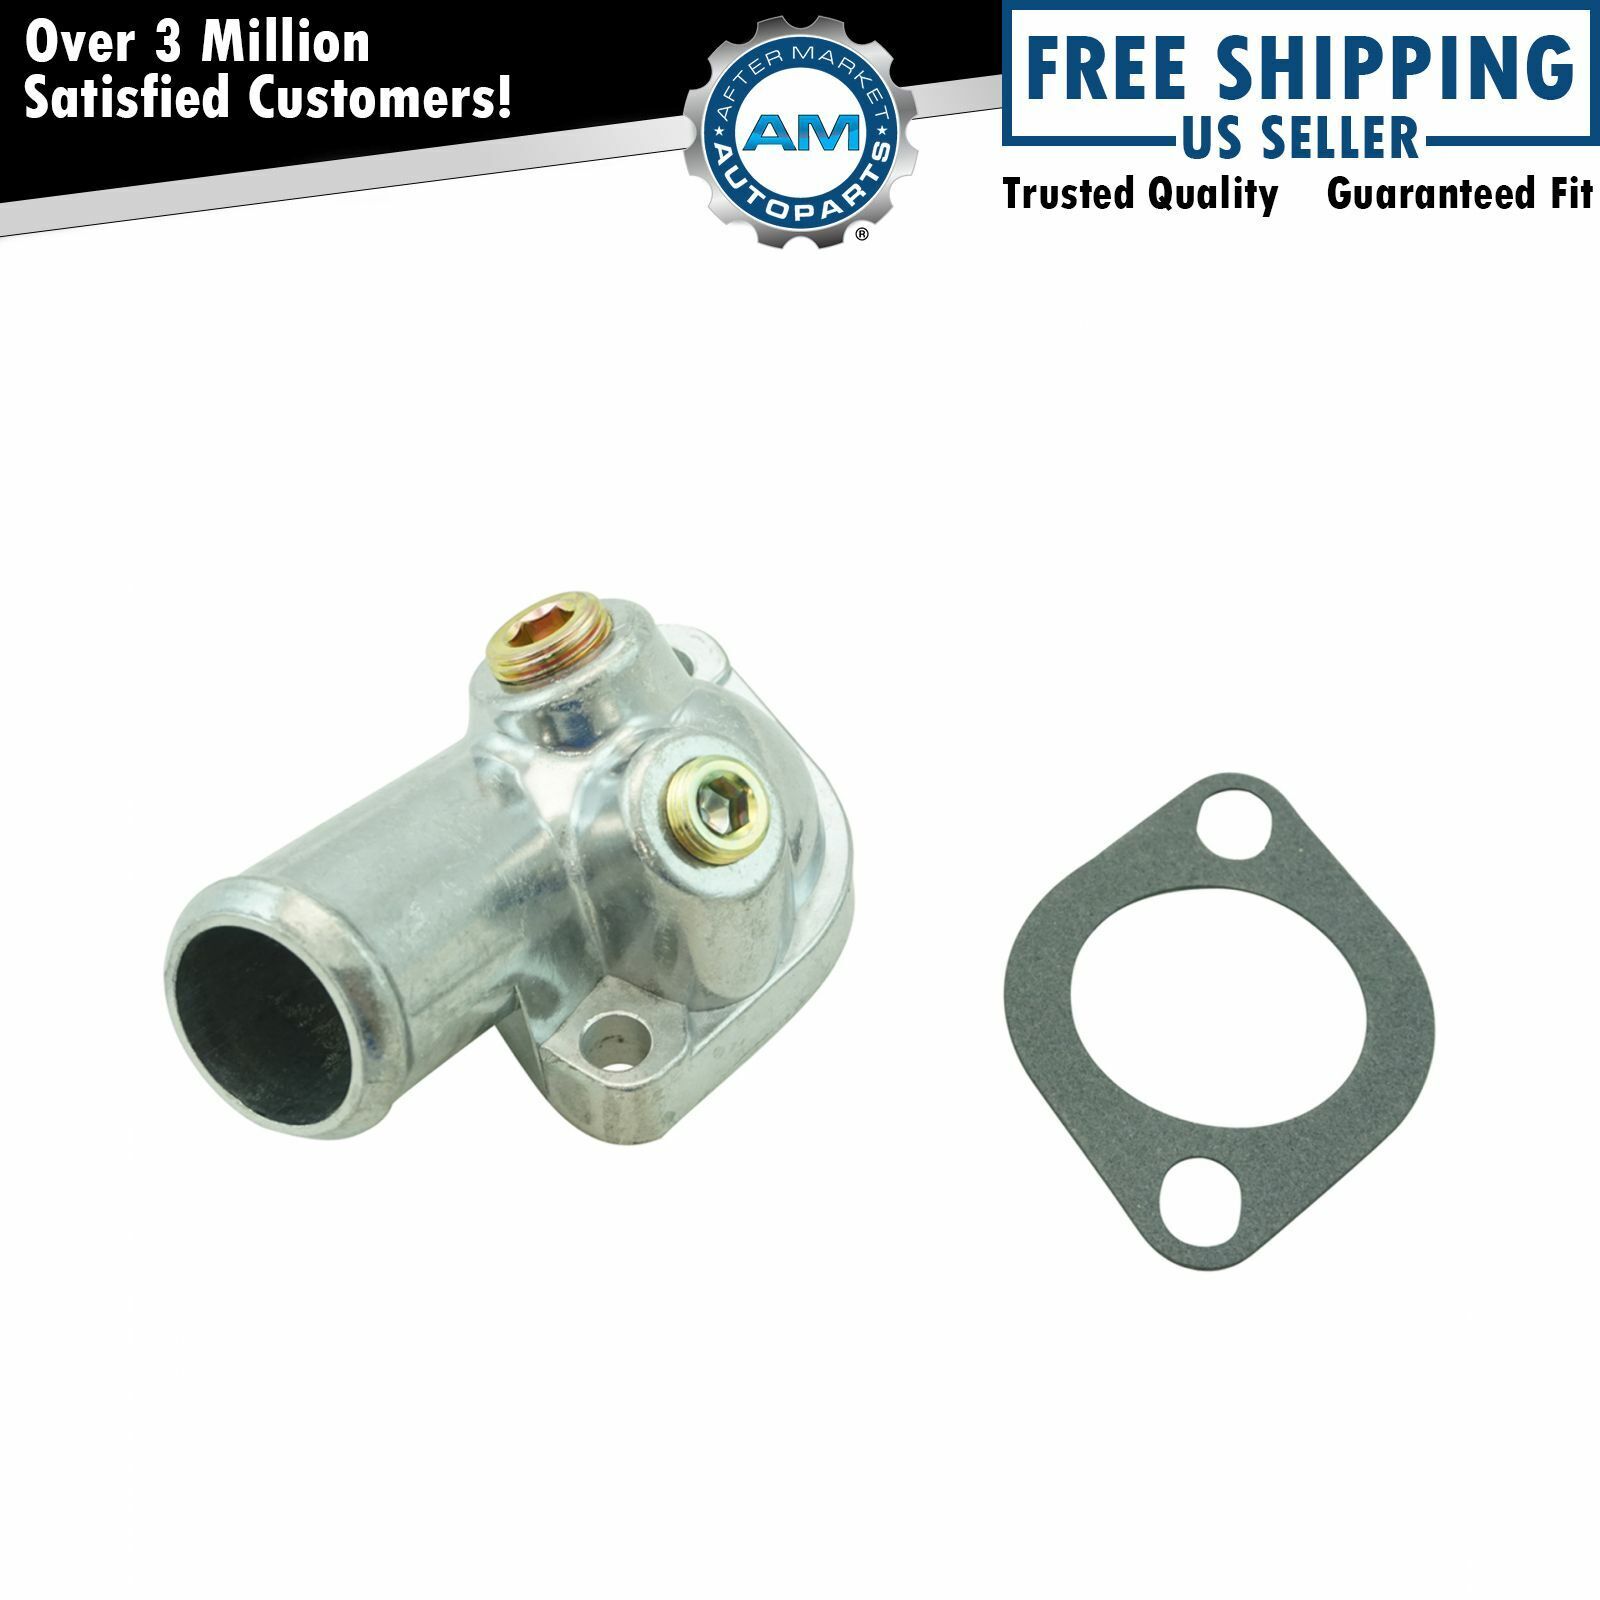 Dorman 902-2009 Engine Coolant Thermostat Housing w/ Gasket for Chevy GMC Buick